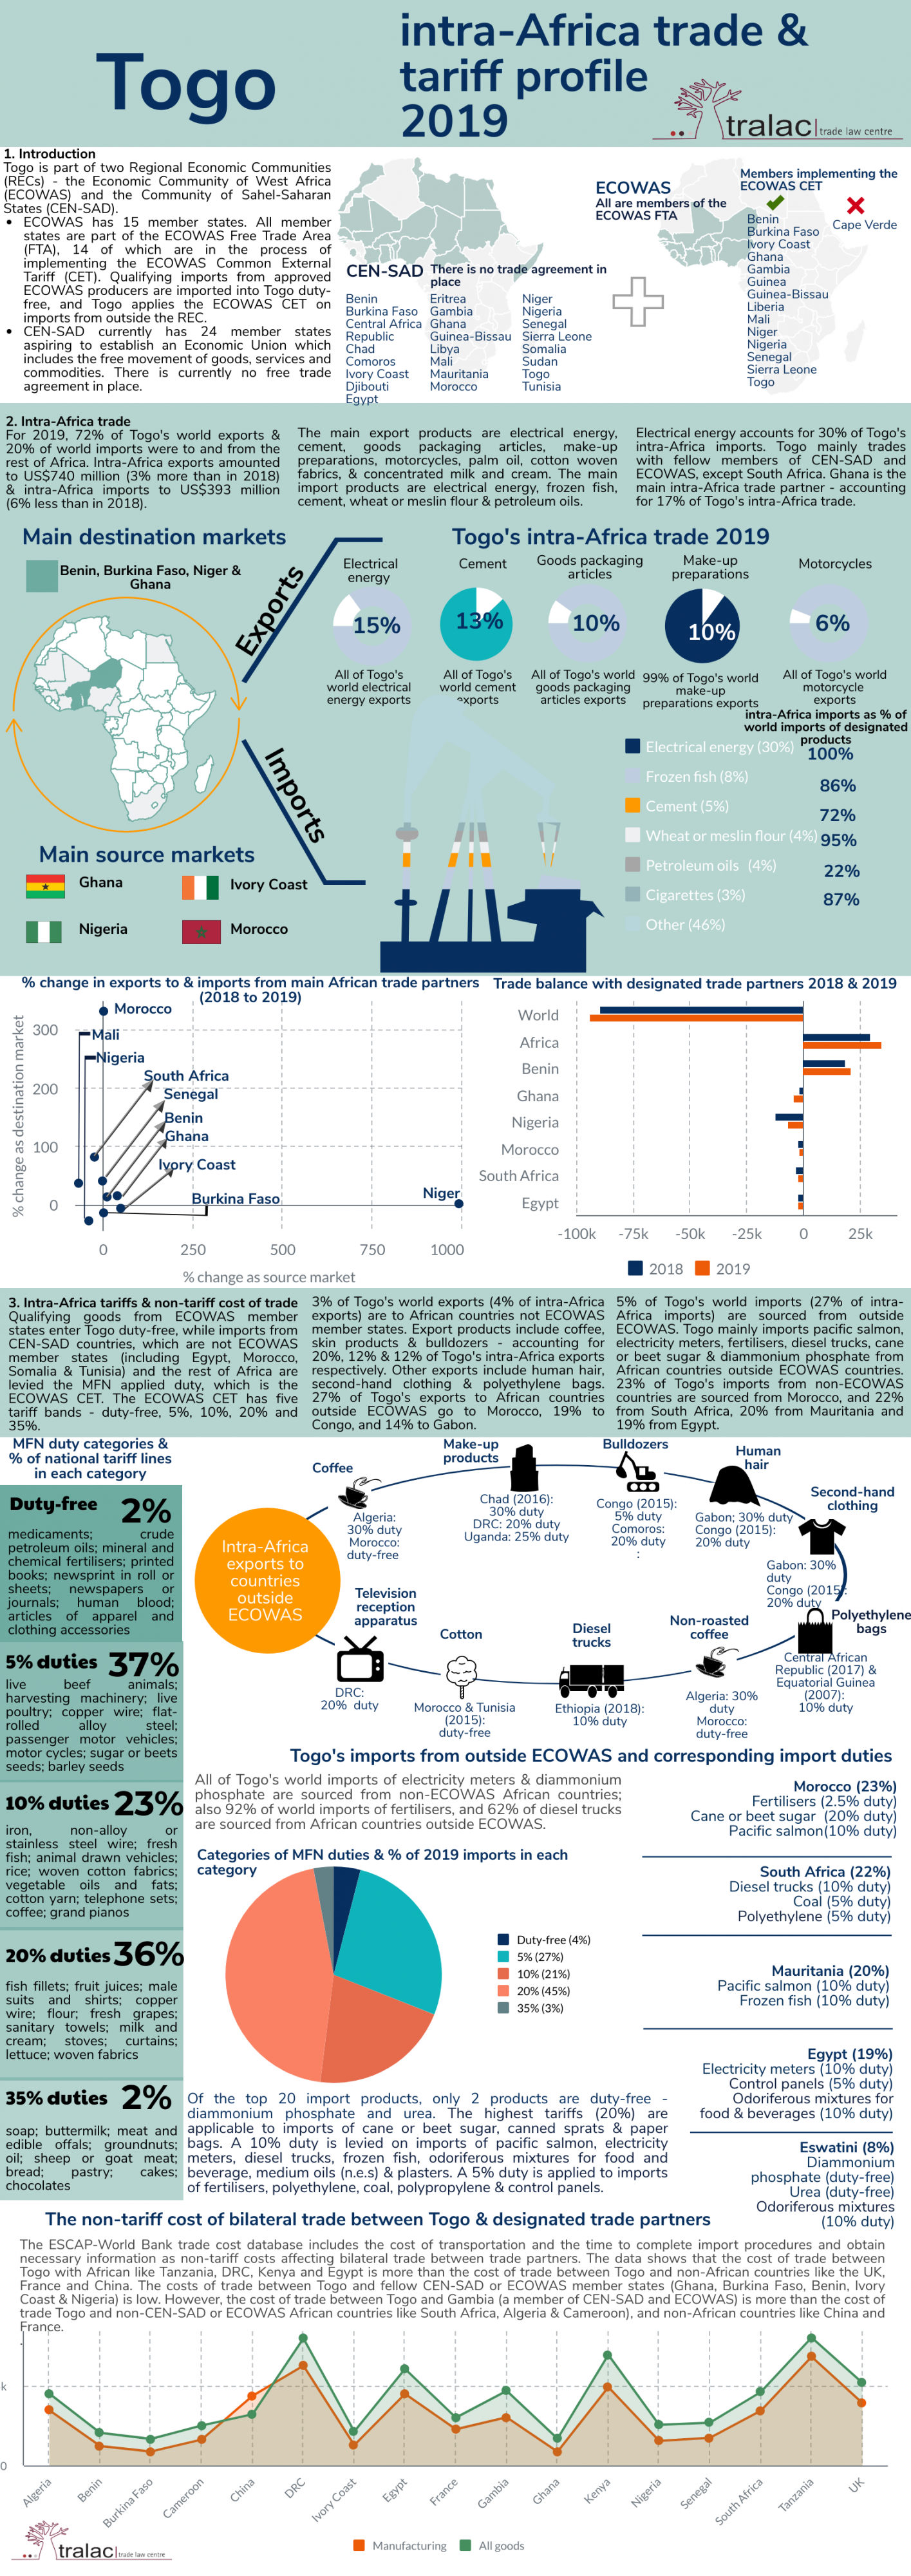 Togo: 2019 intra-Africa trade and tariff profile